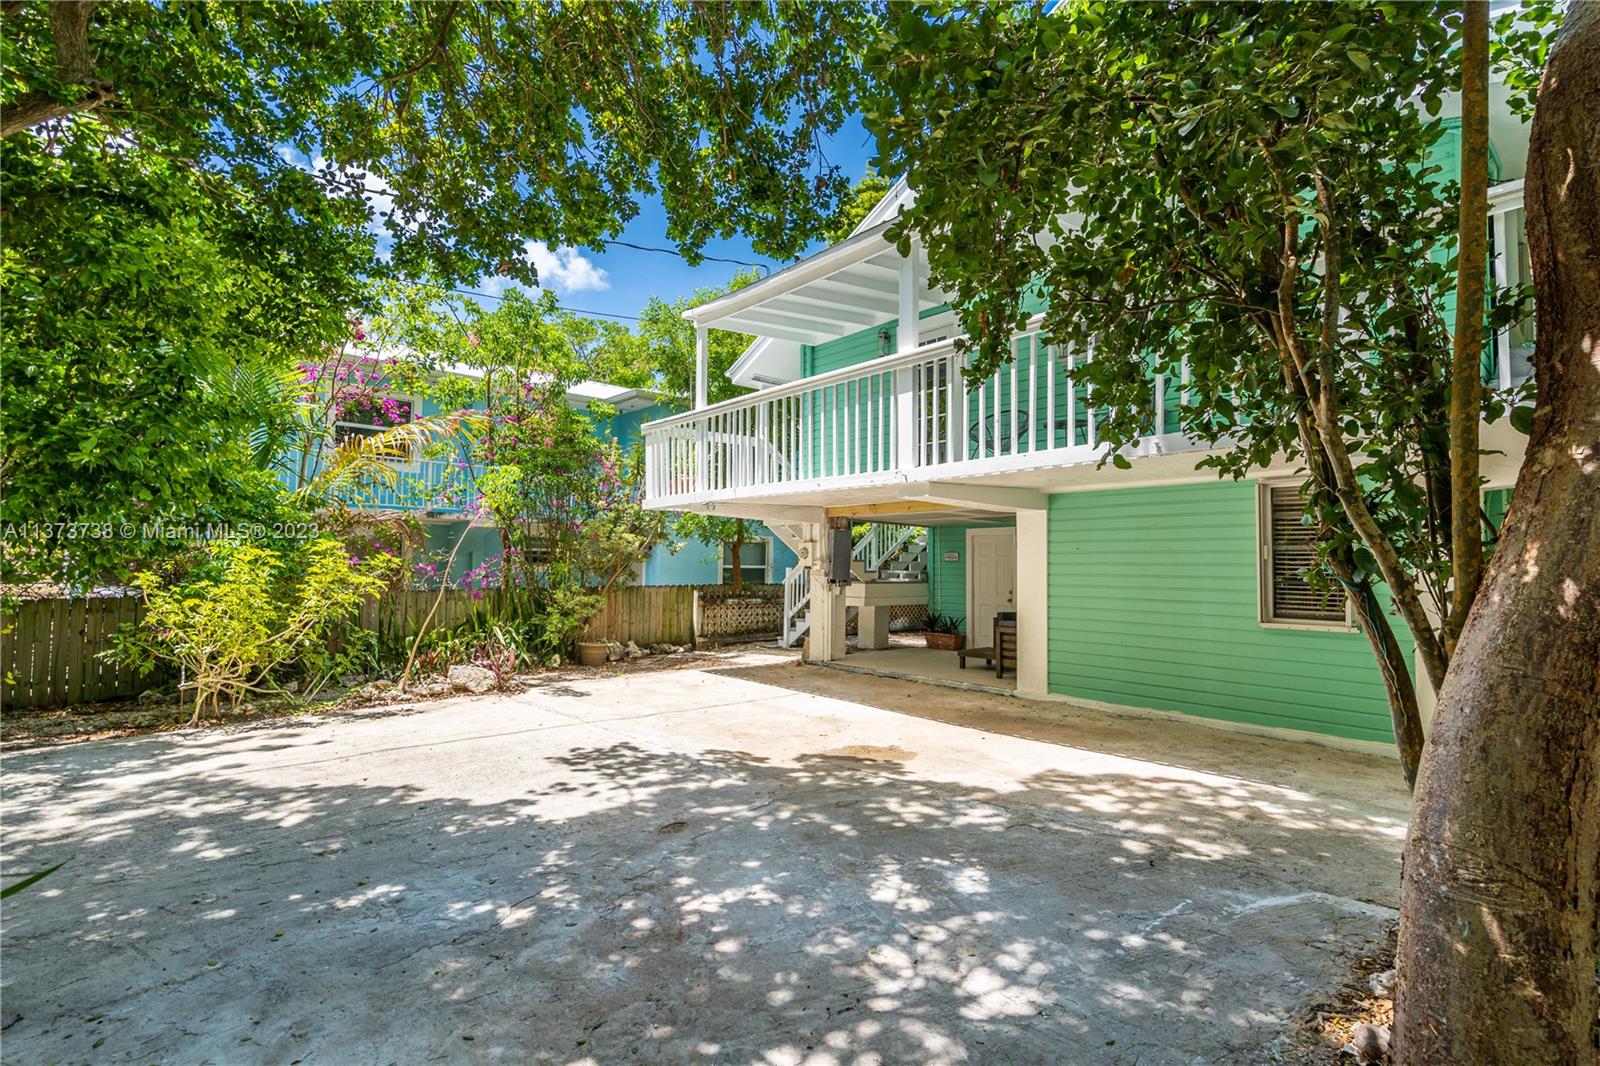 210 Palm Ave, Islamorada, FL 33036, 5 Bedrooms Bedrooms, ,3 BathroomsBathrooms,Residential,For Sale,Palm Ave,A11373738